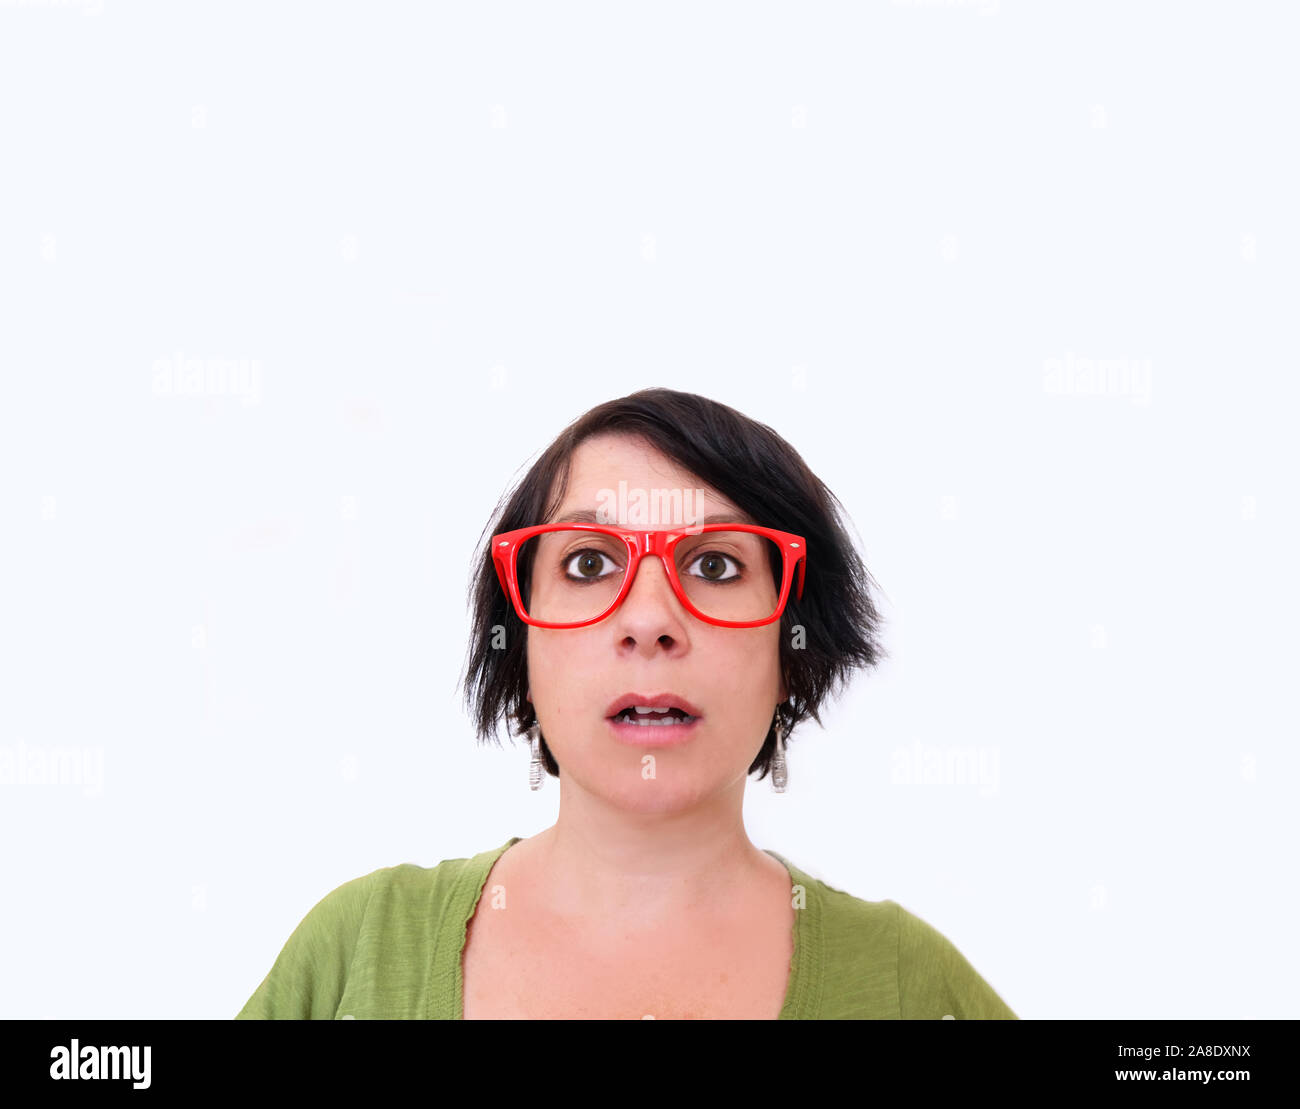 woman with red glasses making a surprised face Stock Photo